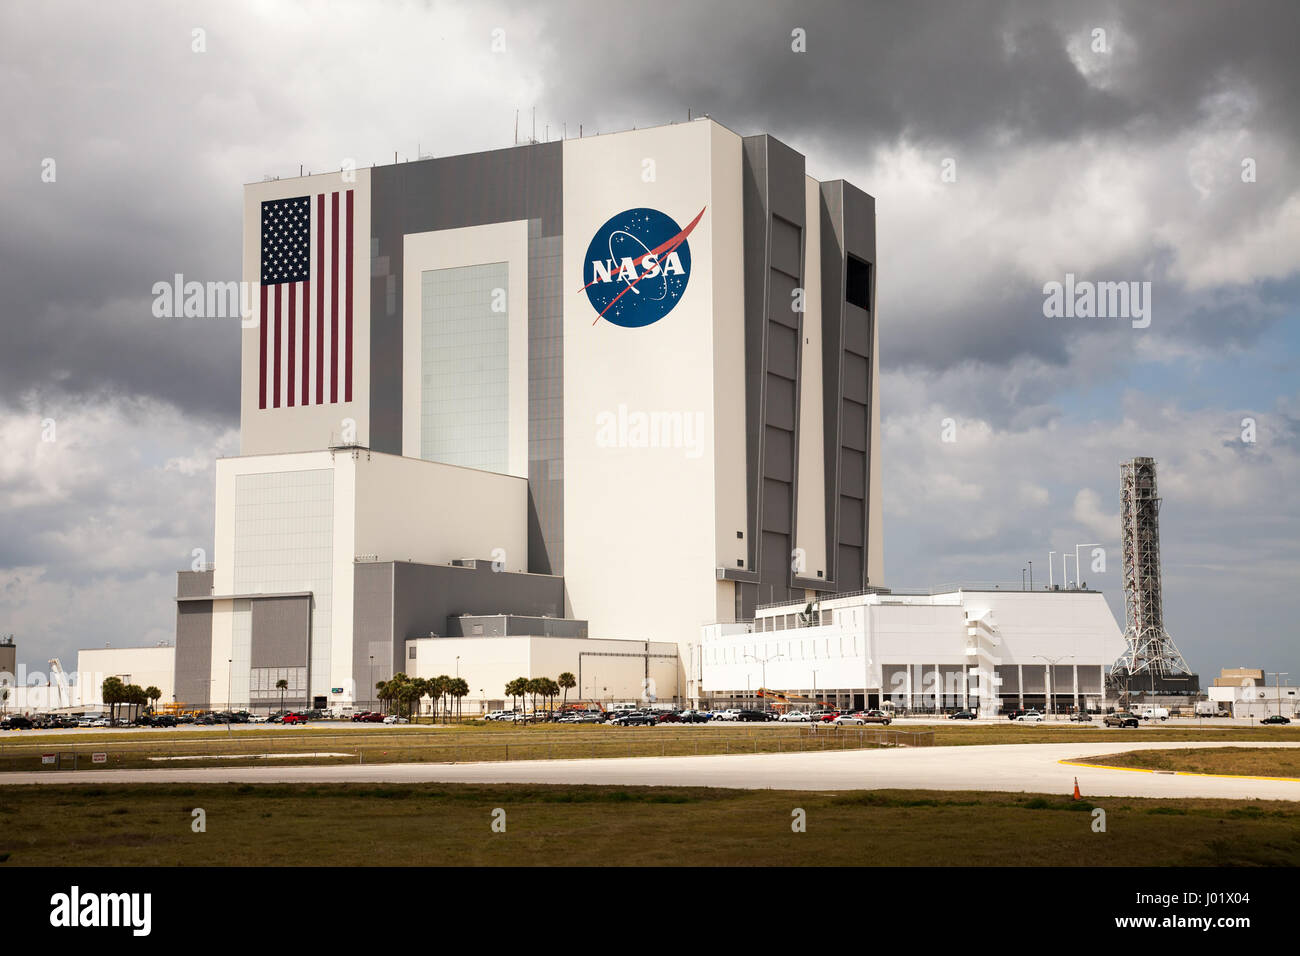 Cape Canaveral, FL USA- March 28, 2012: The Vehicle Assembly Building at NASA, Kennedy Space Center in Florida, USA. Stock Photo